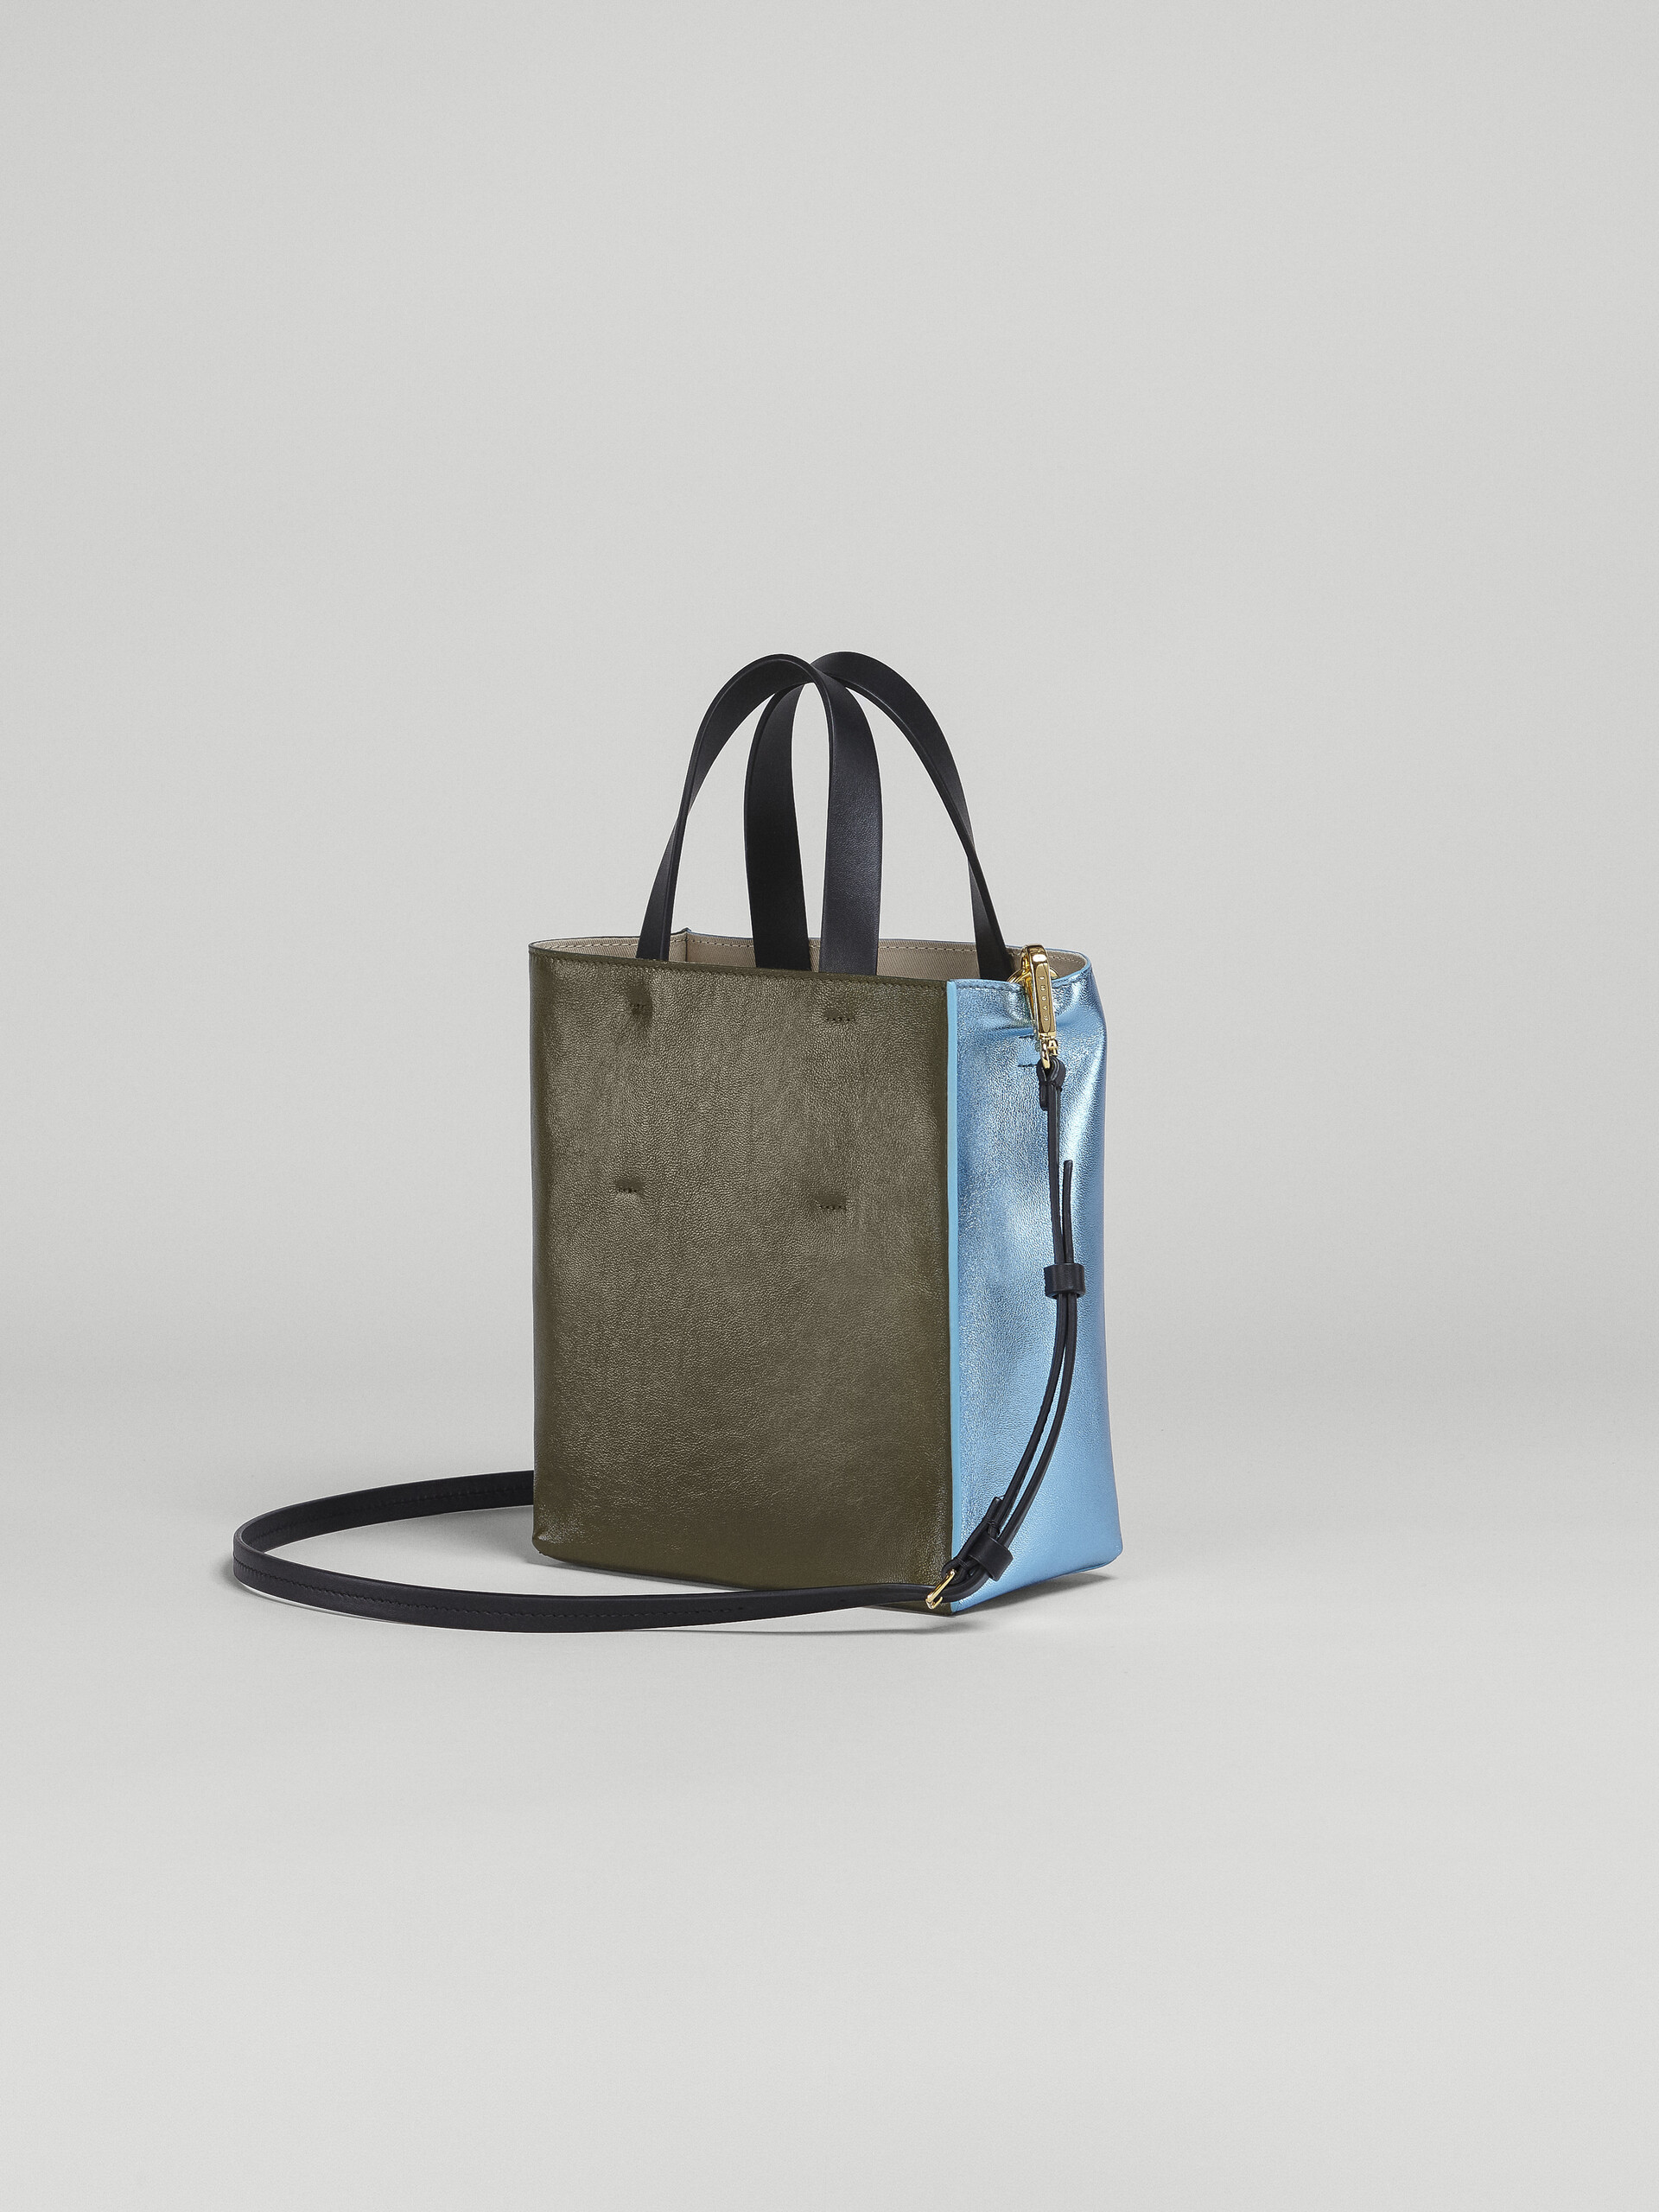 MUSEO mini bag in pale blue and green metallic leather - Shopping Bags - Image 2